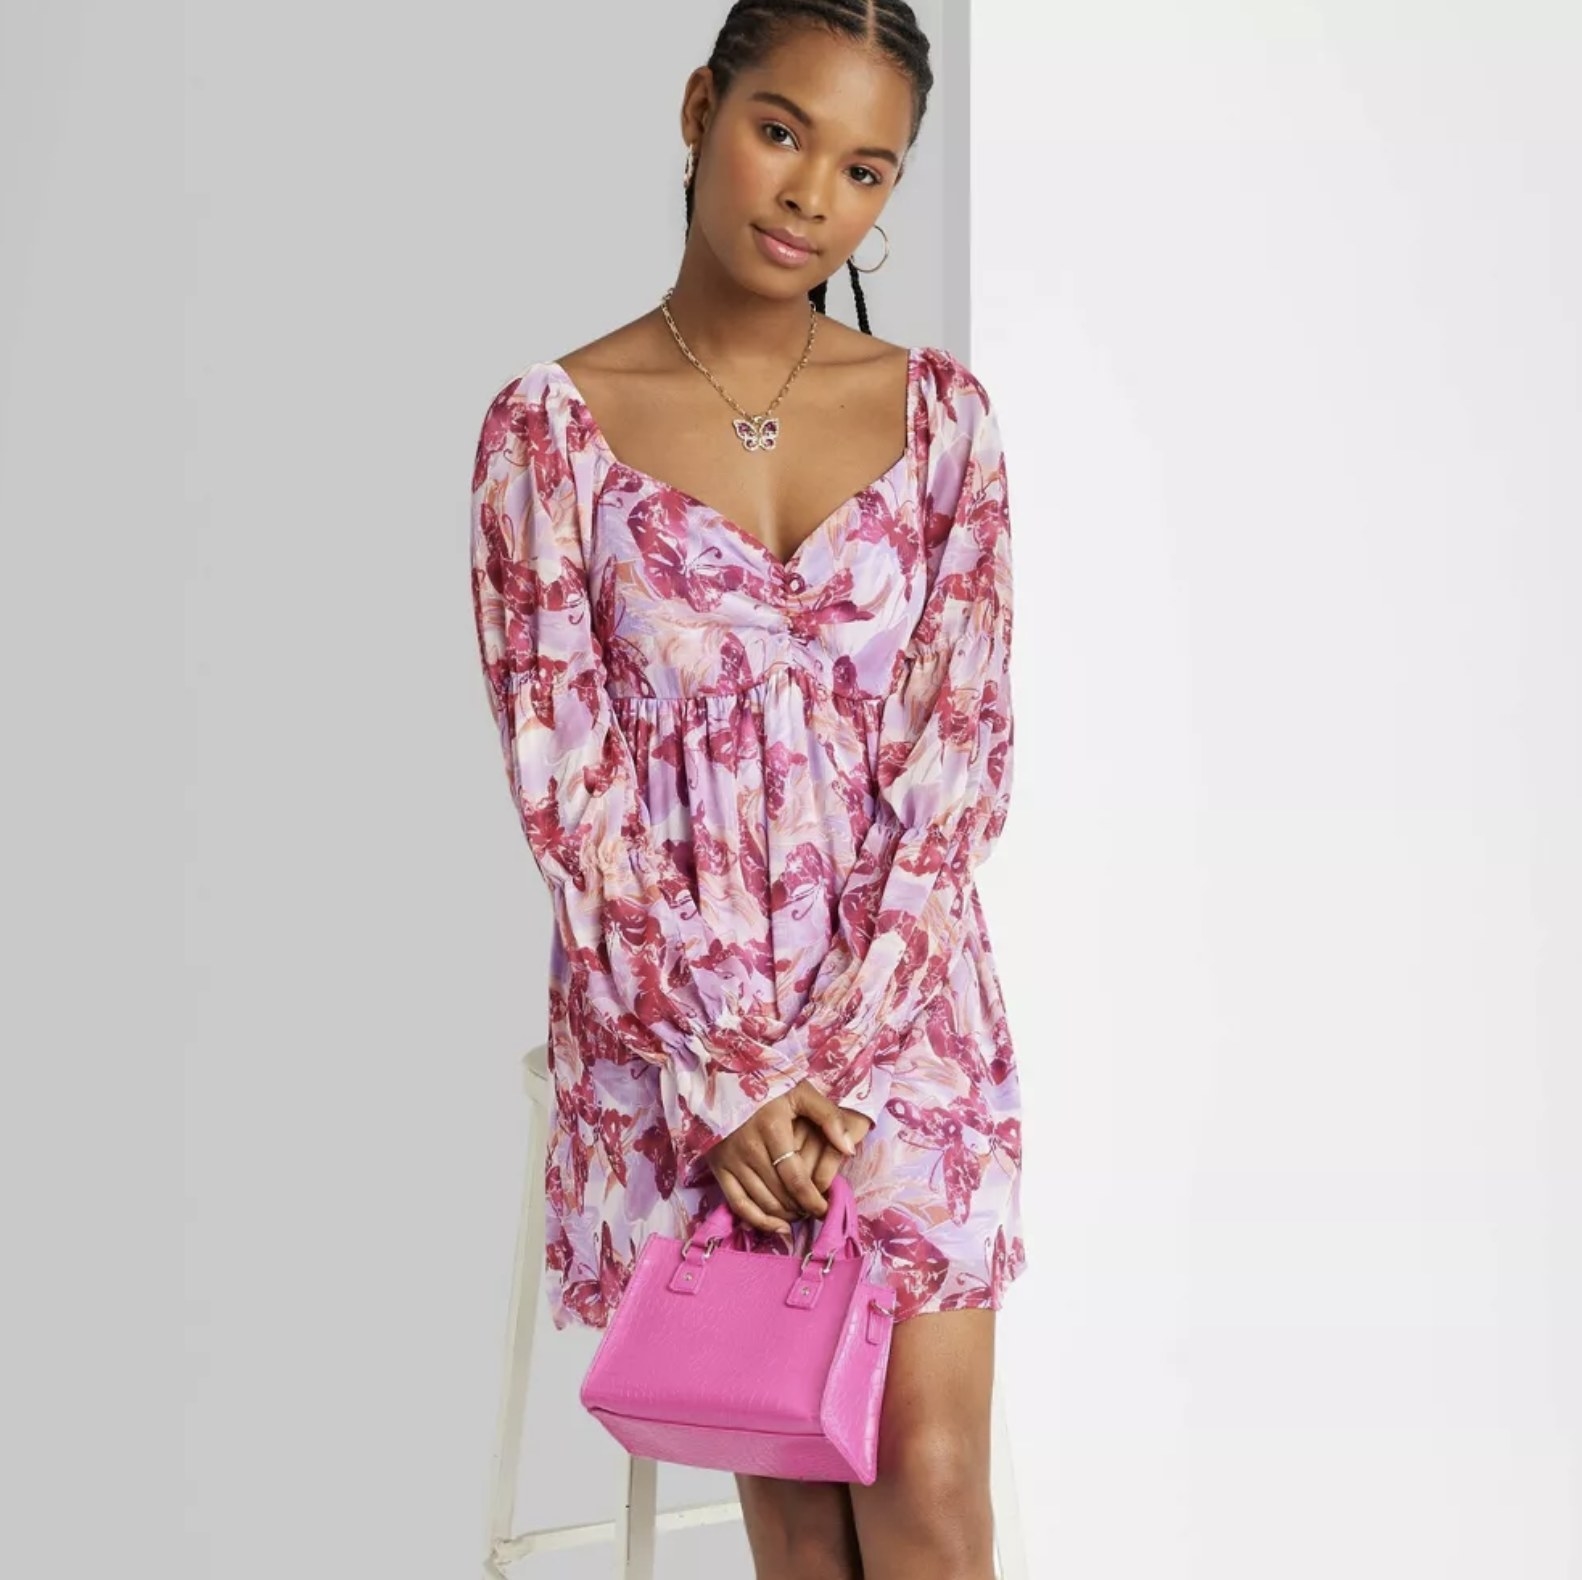 A model wearing the dress in a pink butterfly print